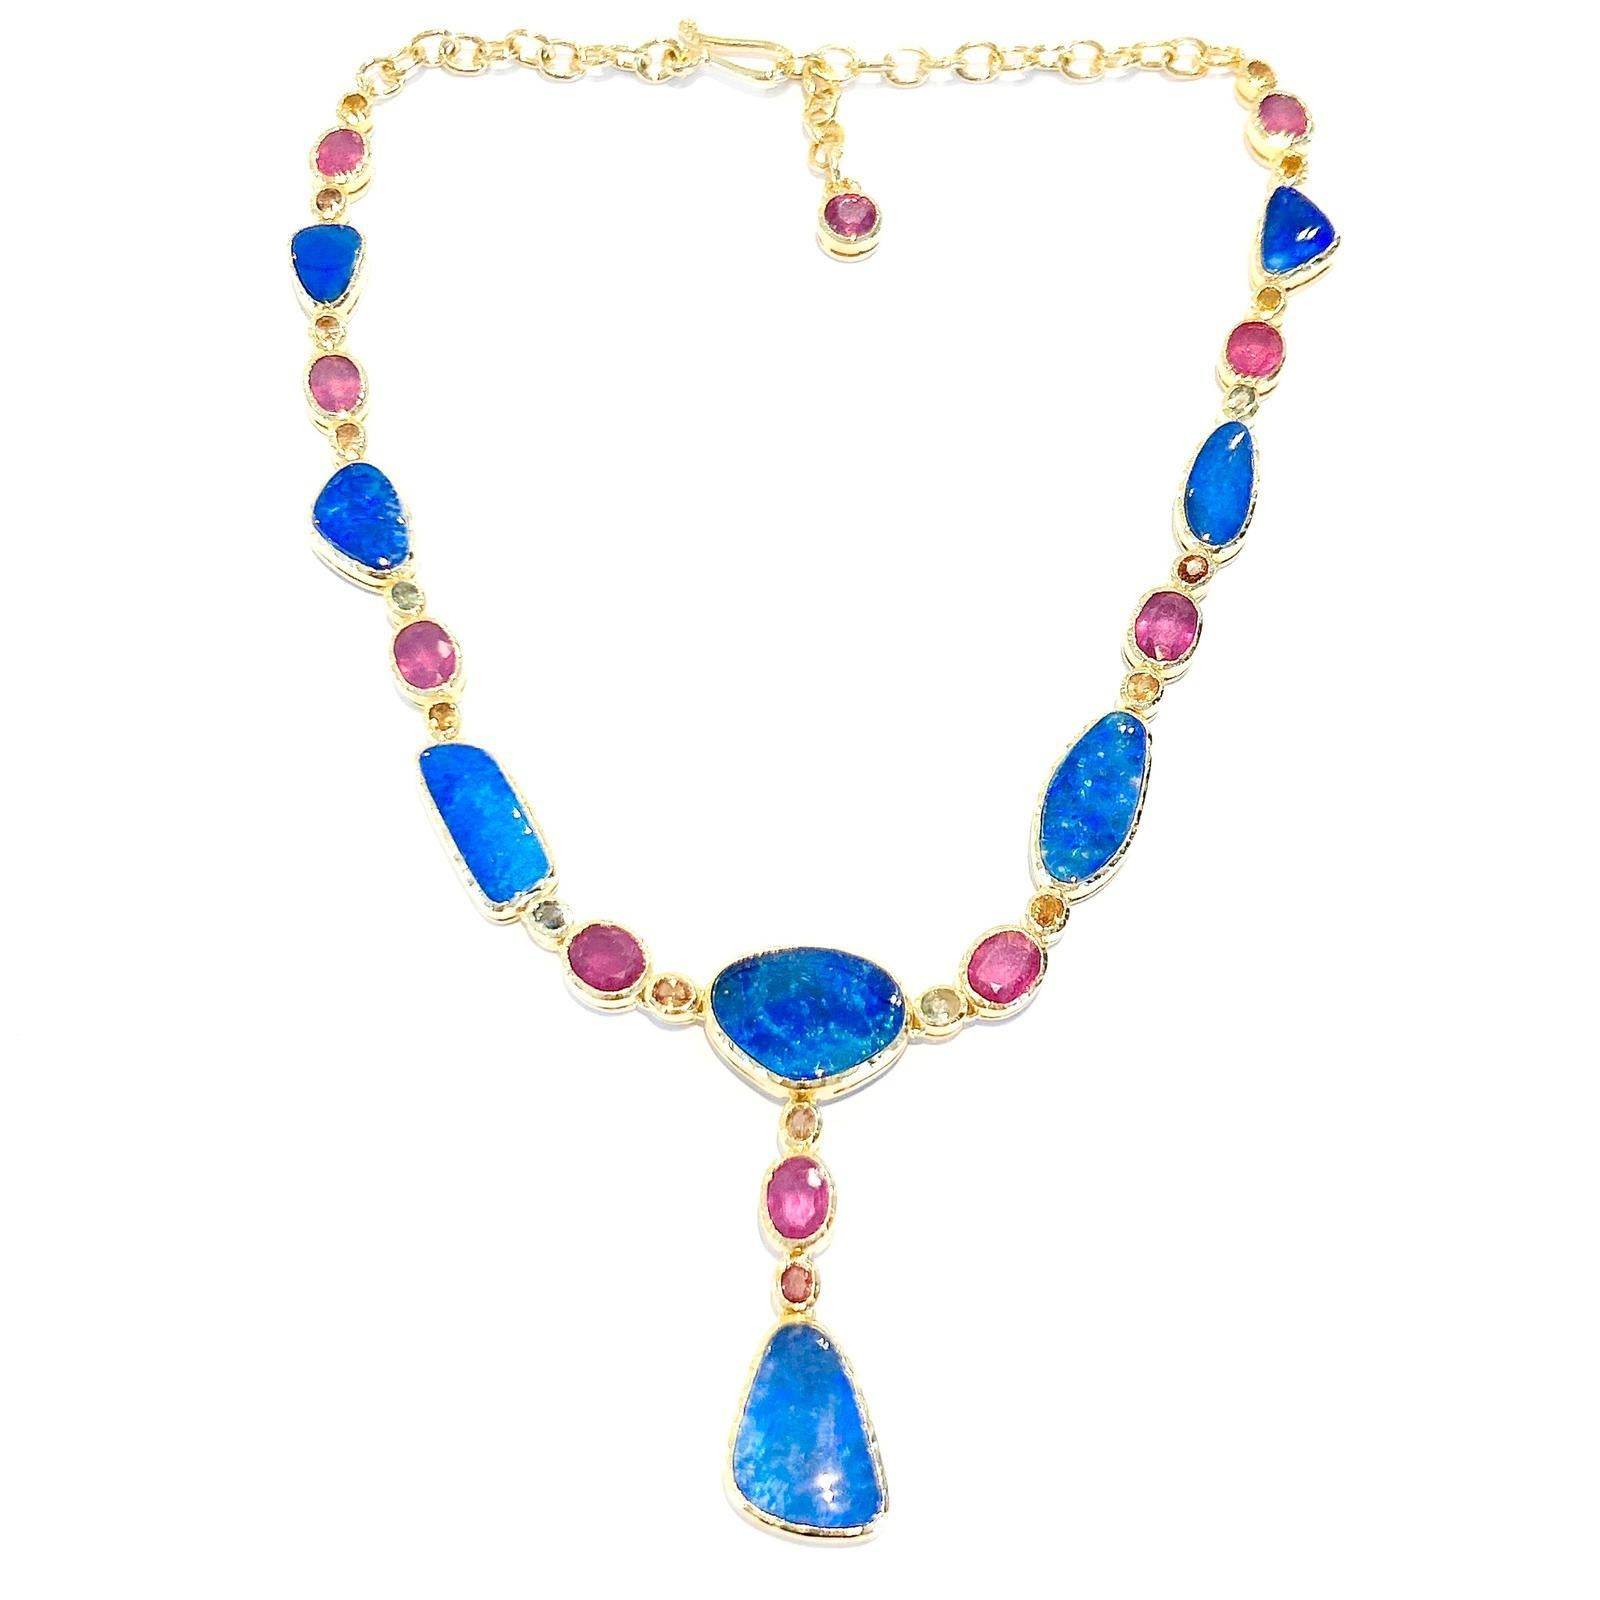 Bochic “Capri” Blue Australian Opal, Ruby, Sapphire Necklace Set In 22K Gold & Silver 
Drop Necklace, Multi natural gem necklace 
Beautiful Natural Australian Blue Opal Natural cut  - 39 carats
Natural Red Pink Color Rubies  - 21 carats 
Oval